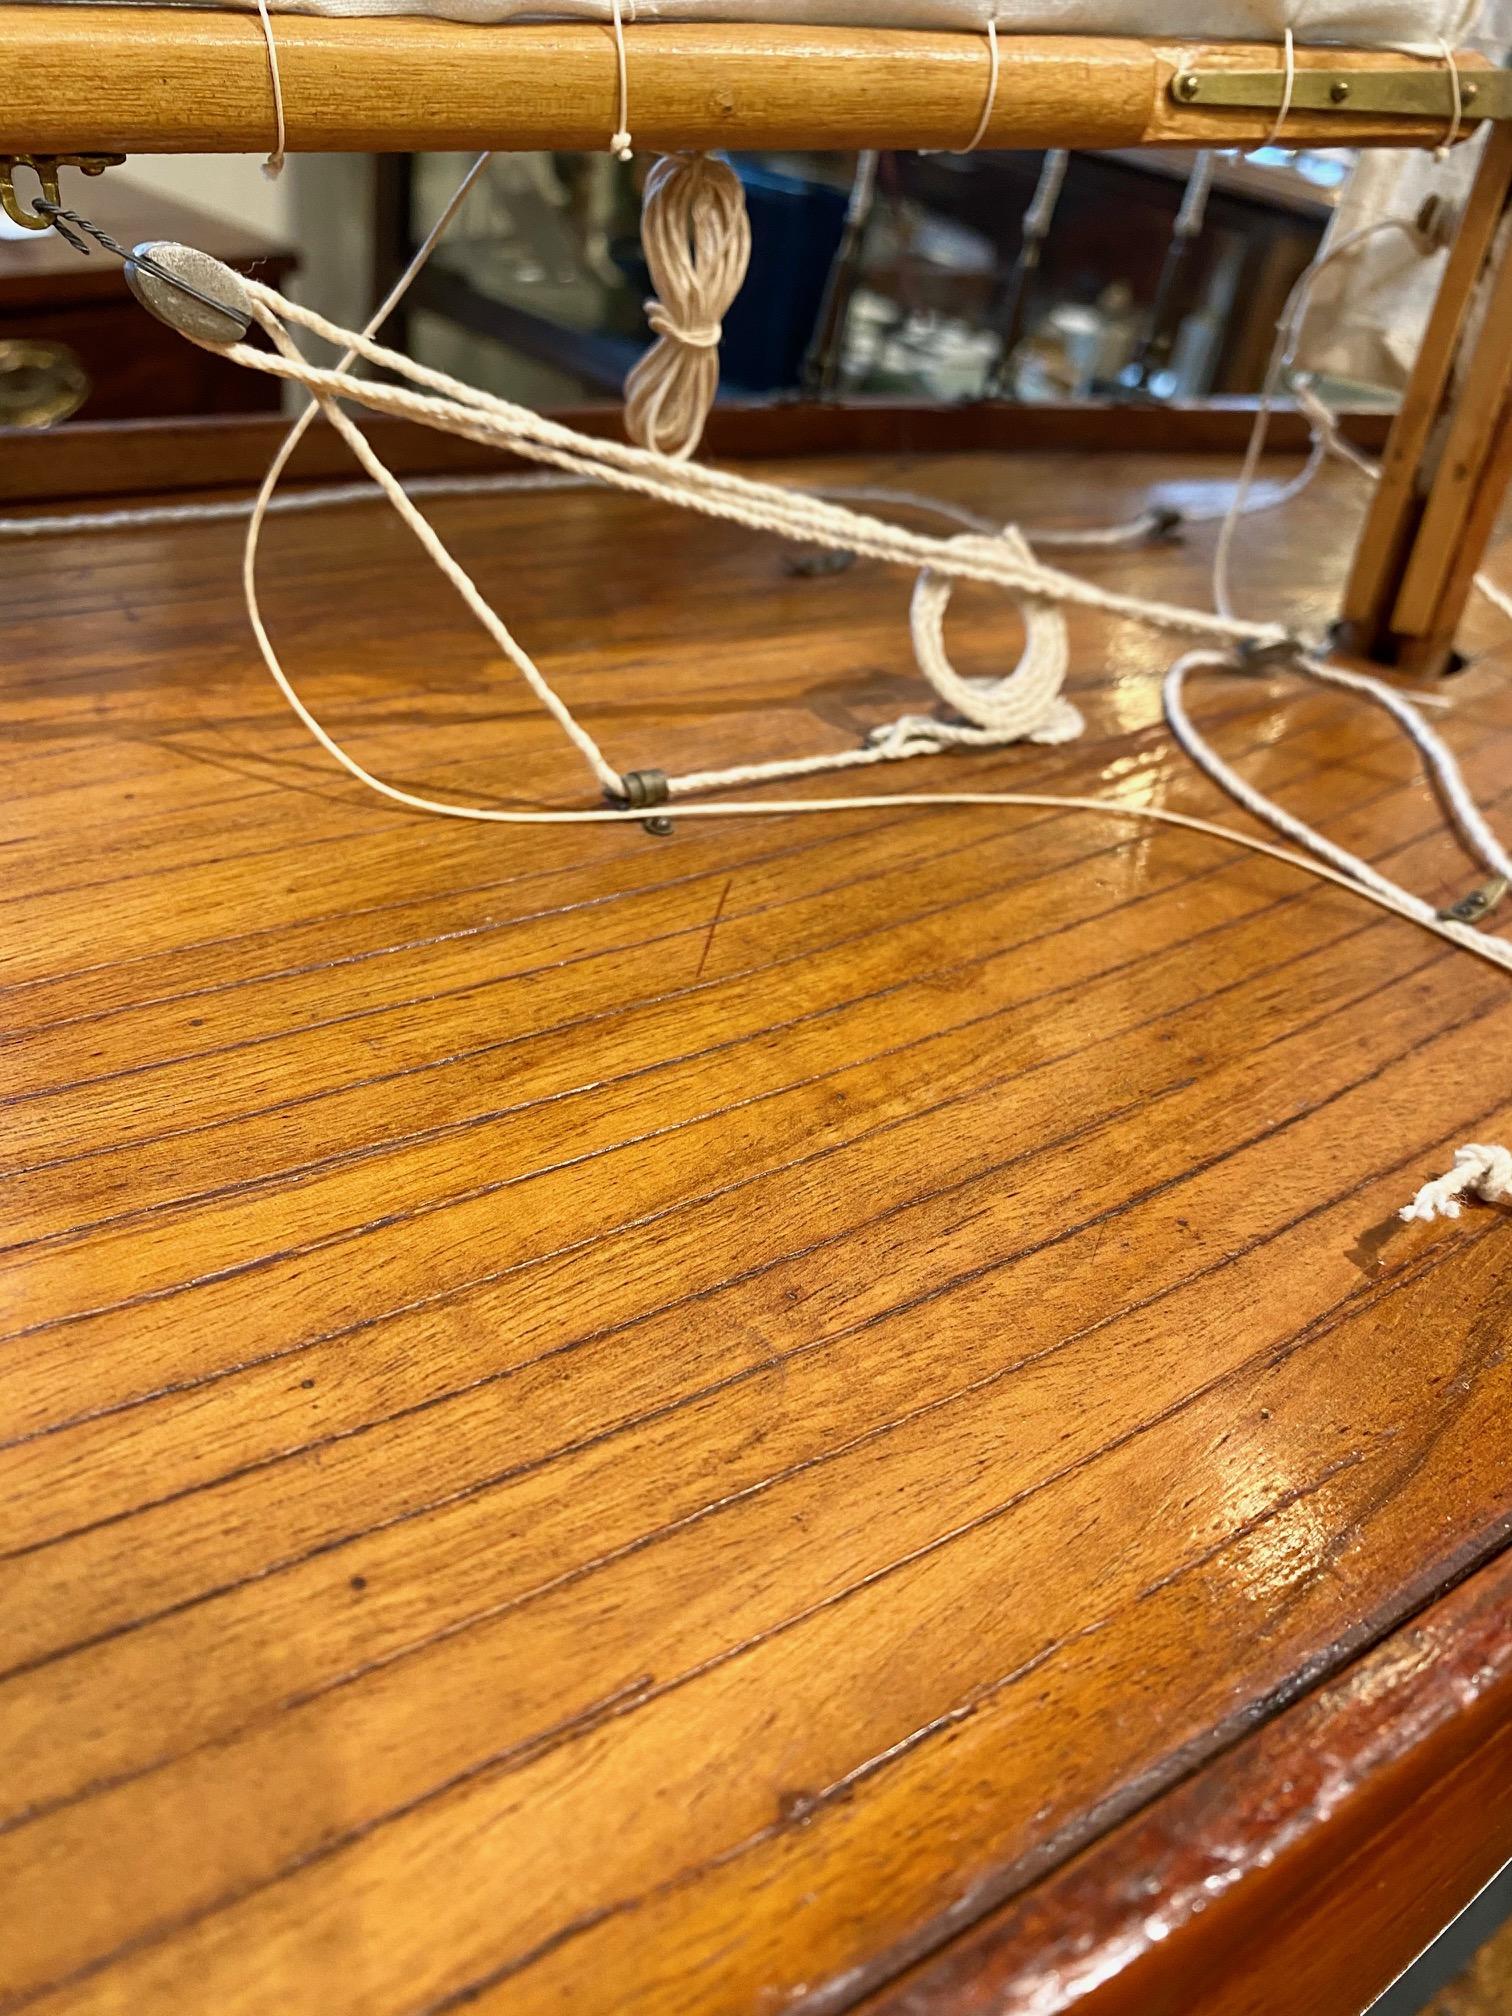 Hand-Crafted American Large Sloop Rigged Sailing Pond Model, circa 1900